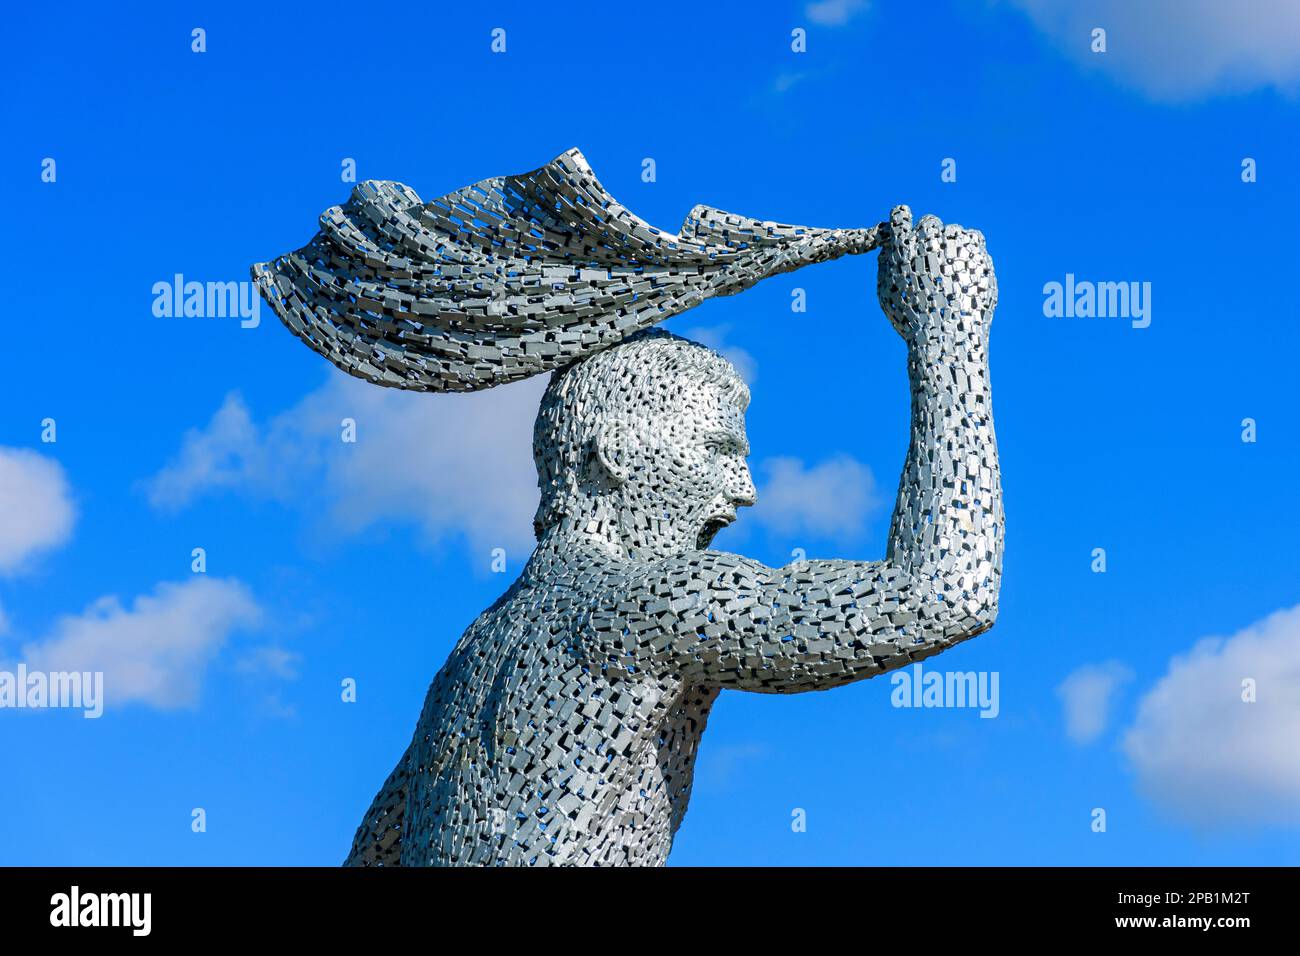 Statue of Sergio Aguero, by the sculptor Andy Scott, at the Etihad Stadium, Manchester, England, UK Stock Photo